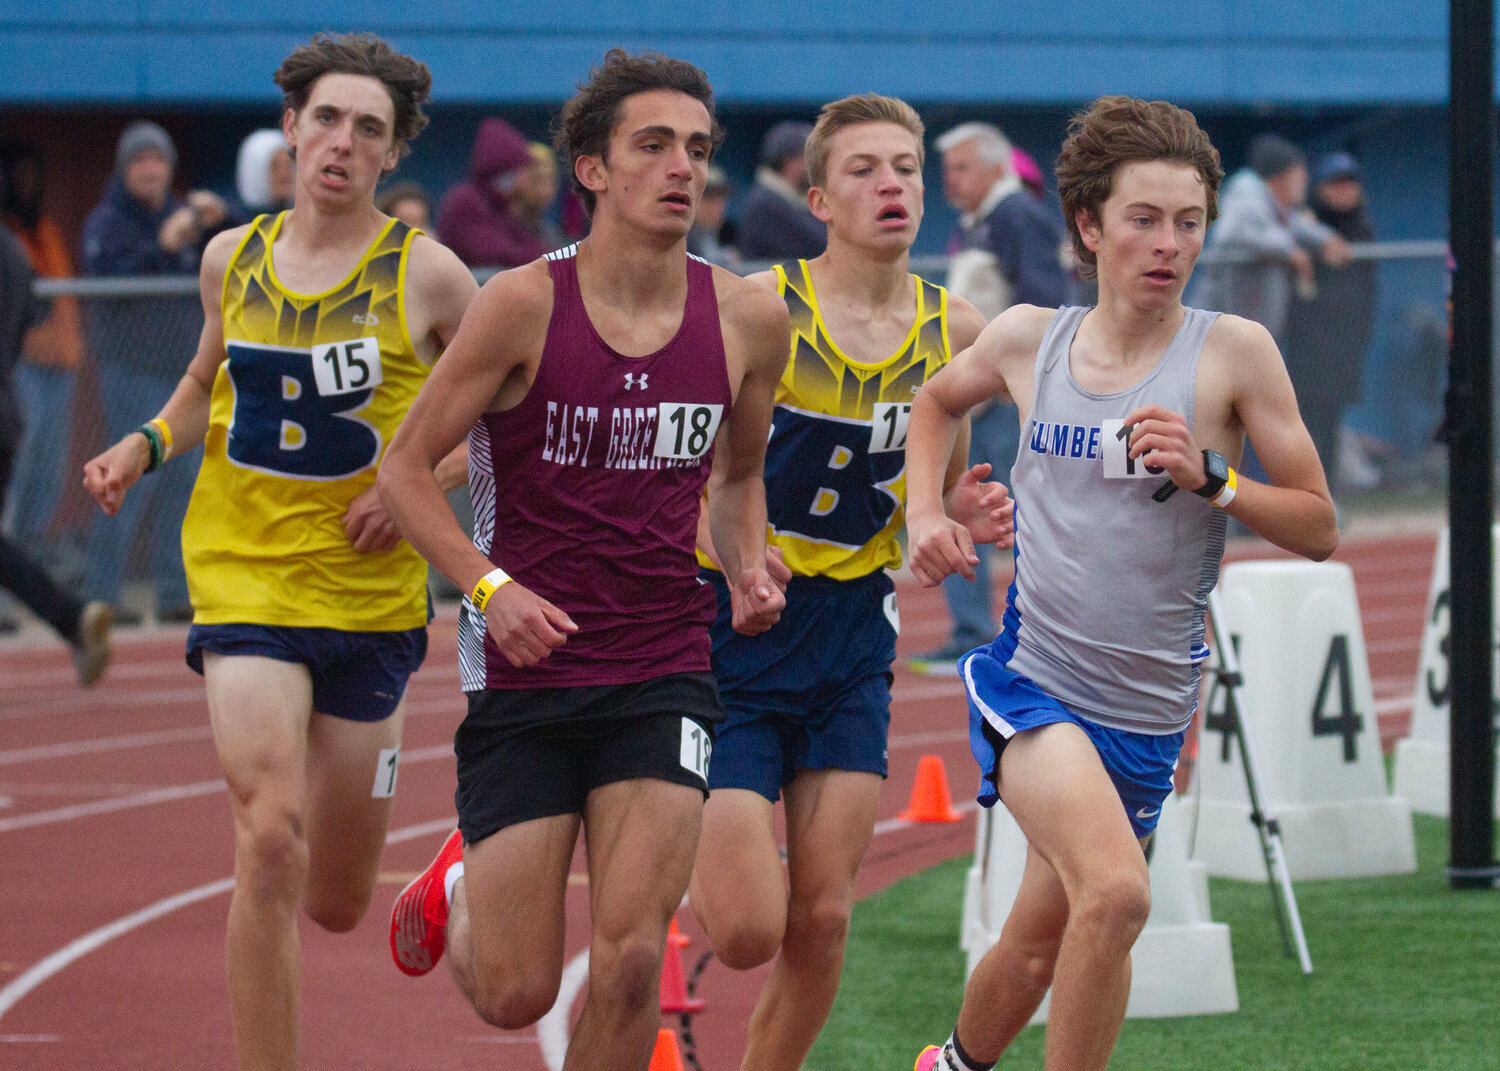 Barrington's Myles Napolitano (left) and Finn Myatt (second from right) compete in the 3,000-meter race at the state track meet on Saturday.